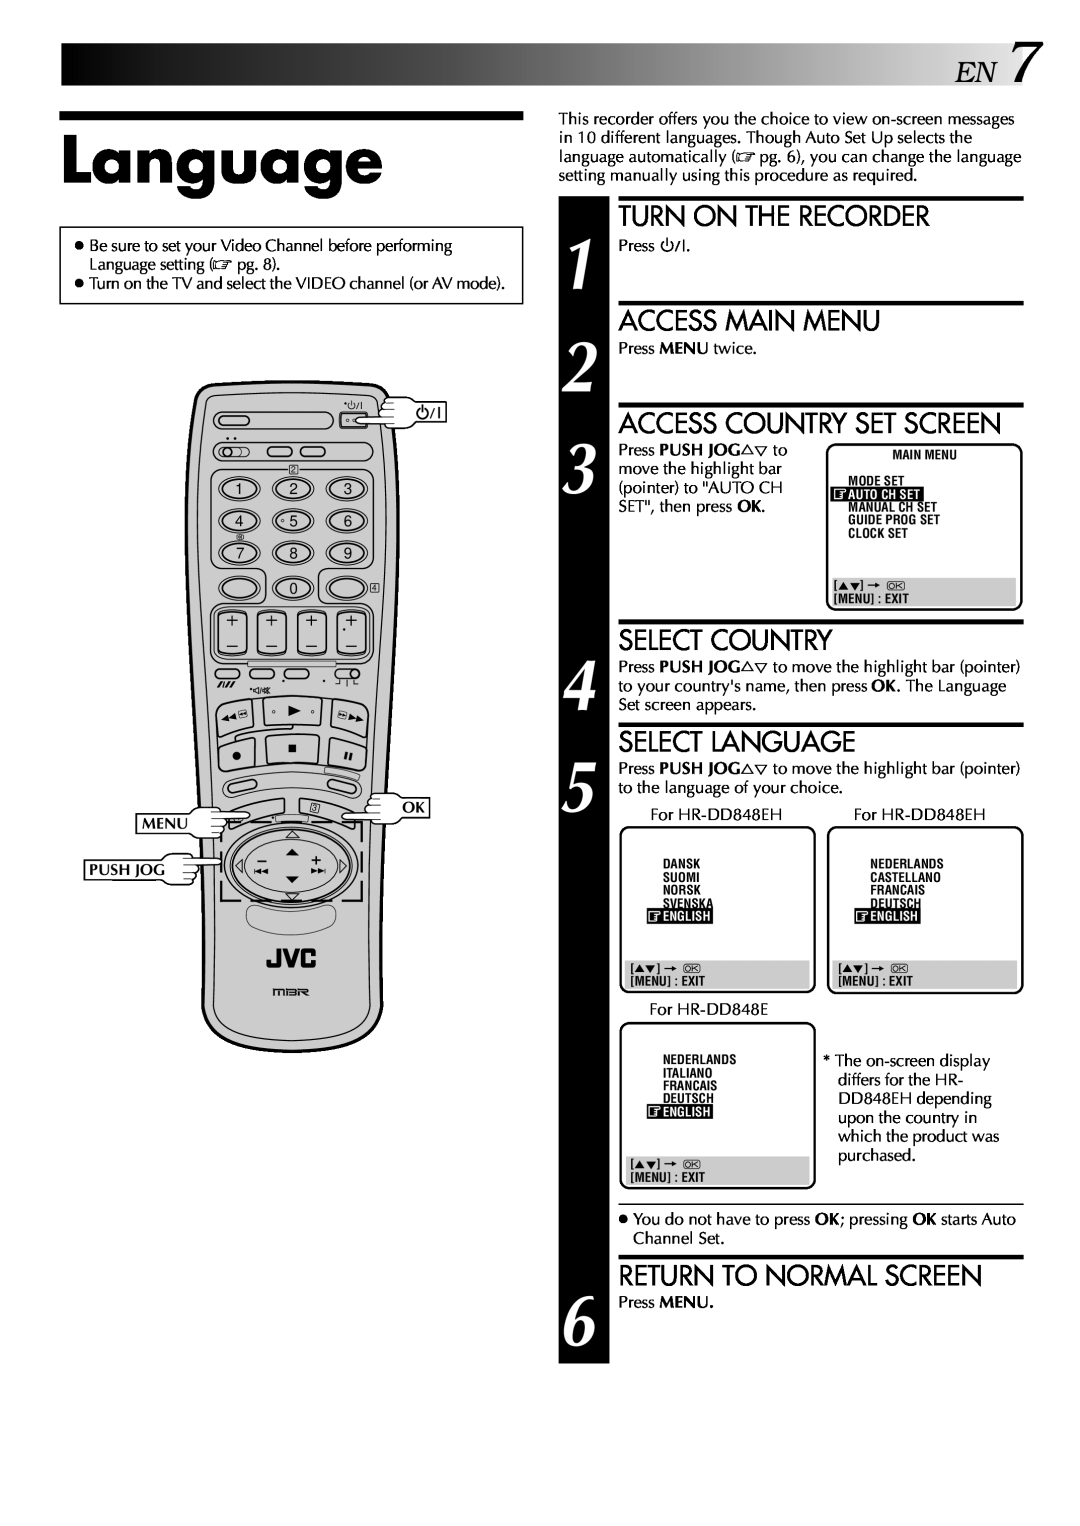 JVC HR-DD848E Turn On The Recorder, Access Main Menu, Access Country Set Screen, Select Country, Select Language 